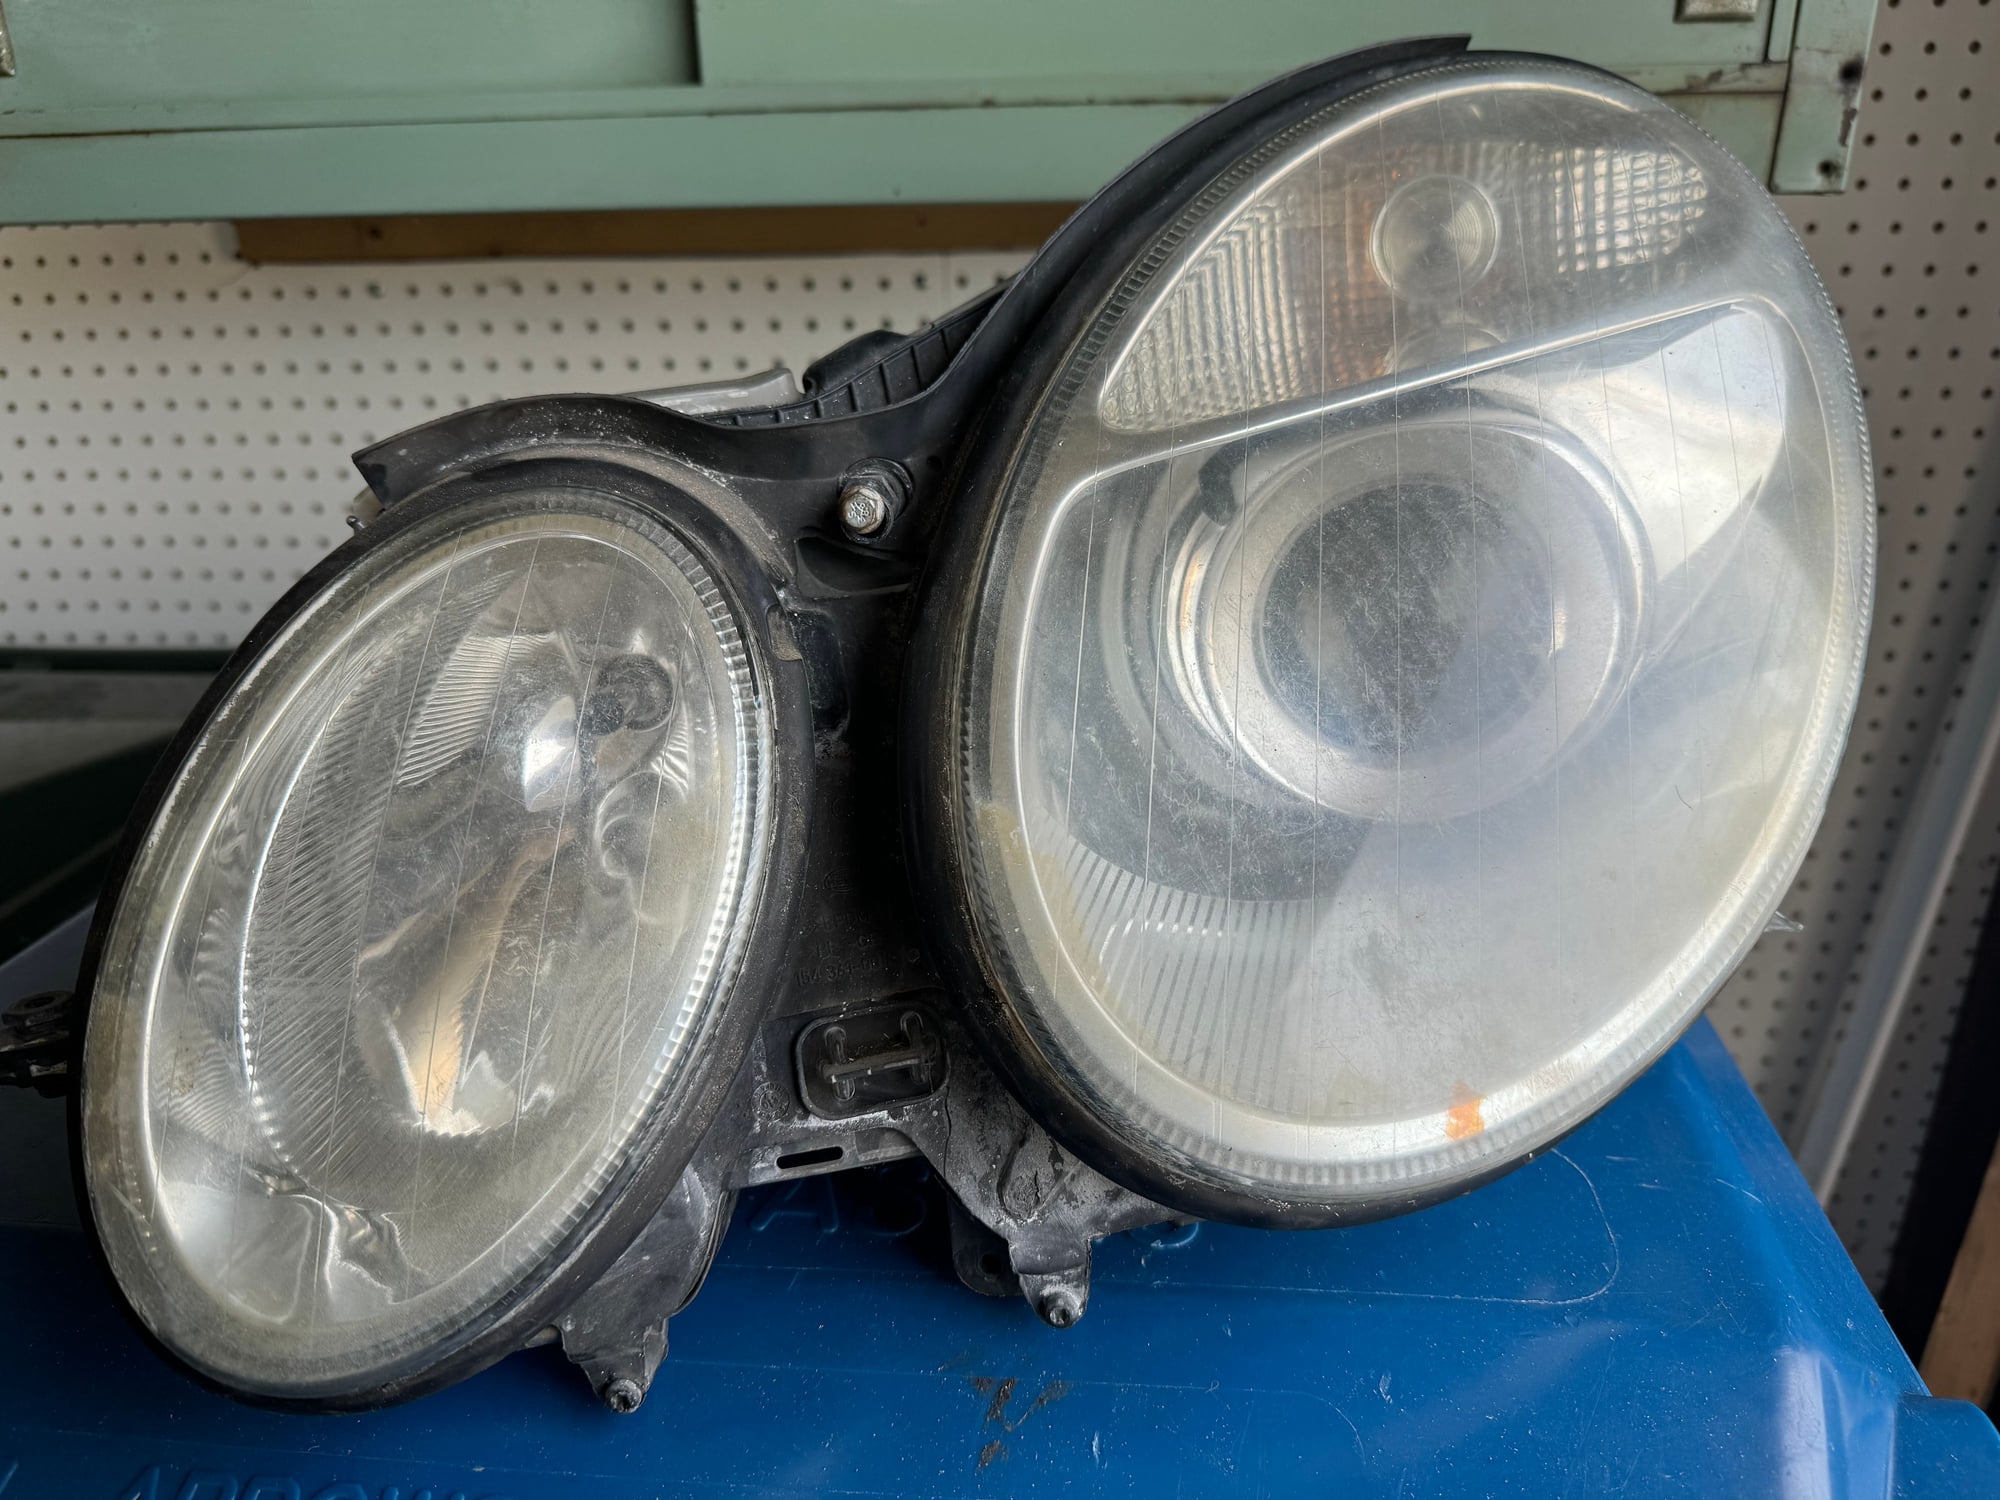 2005 Mercedes-Benz E55 AMG - Pair of Mercedes Benz w211 E-Class 2003-2006 Halogen Headlights - Accessories - $100 - Cleveland, OH 44116, United States